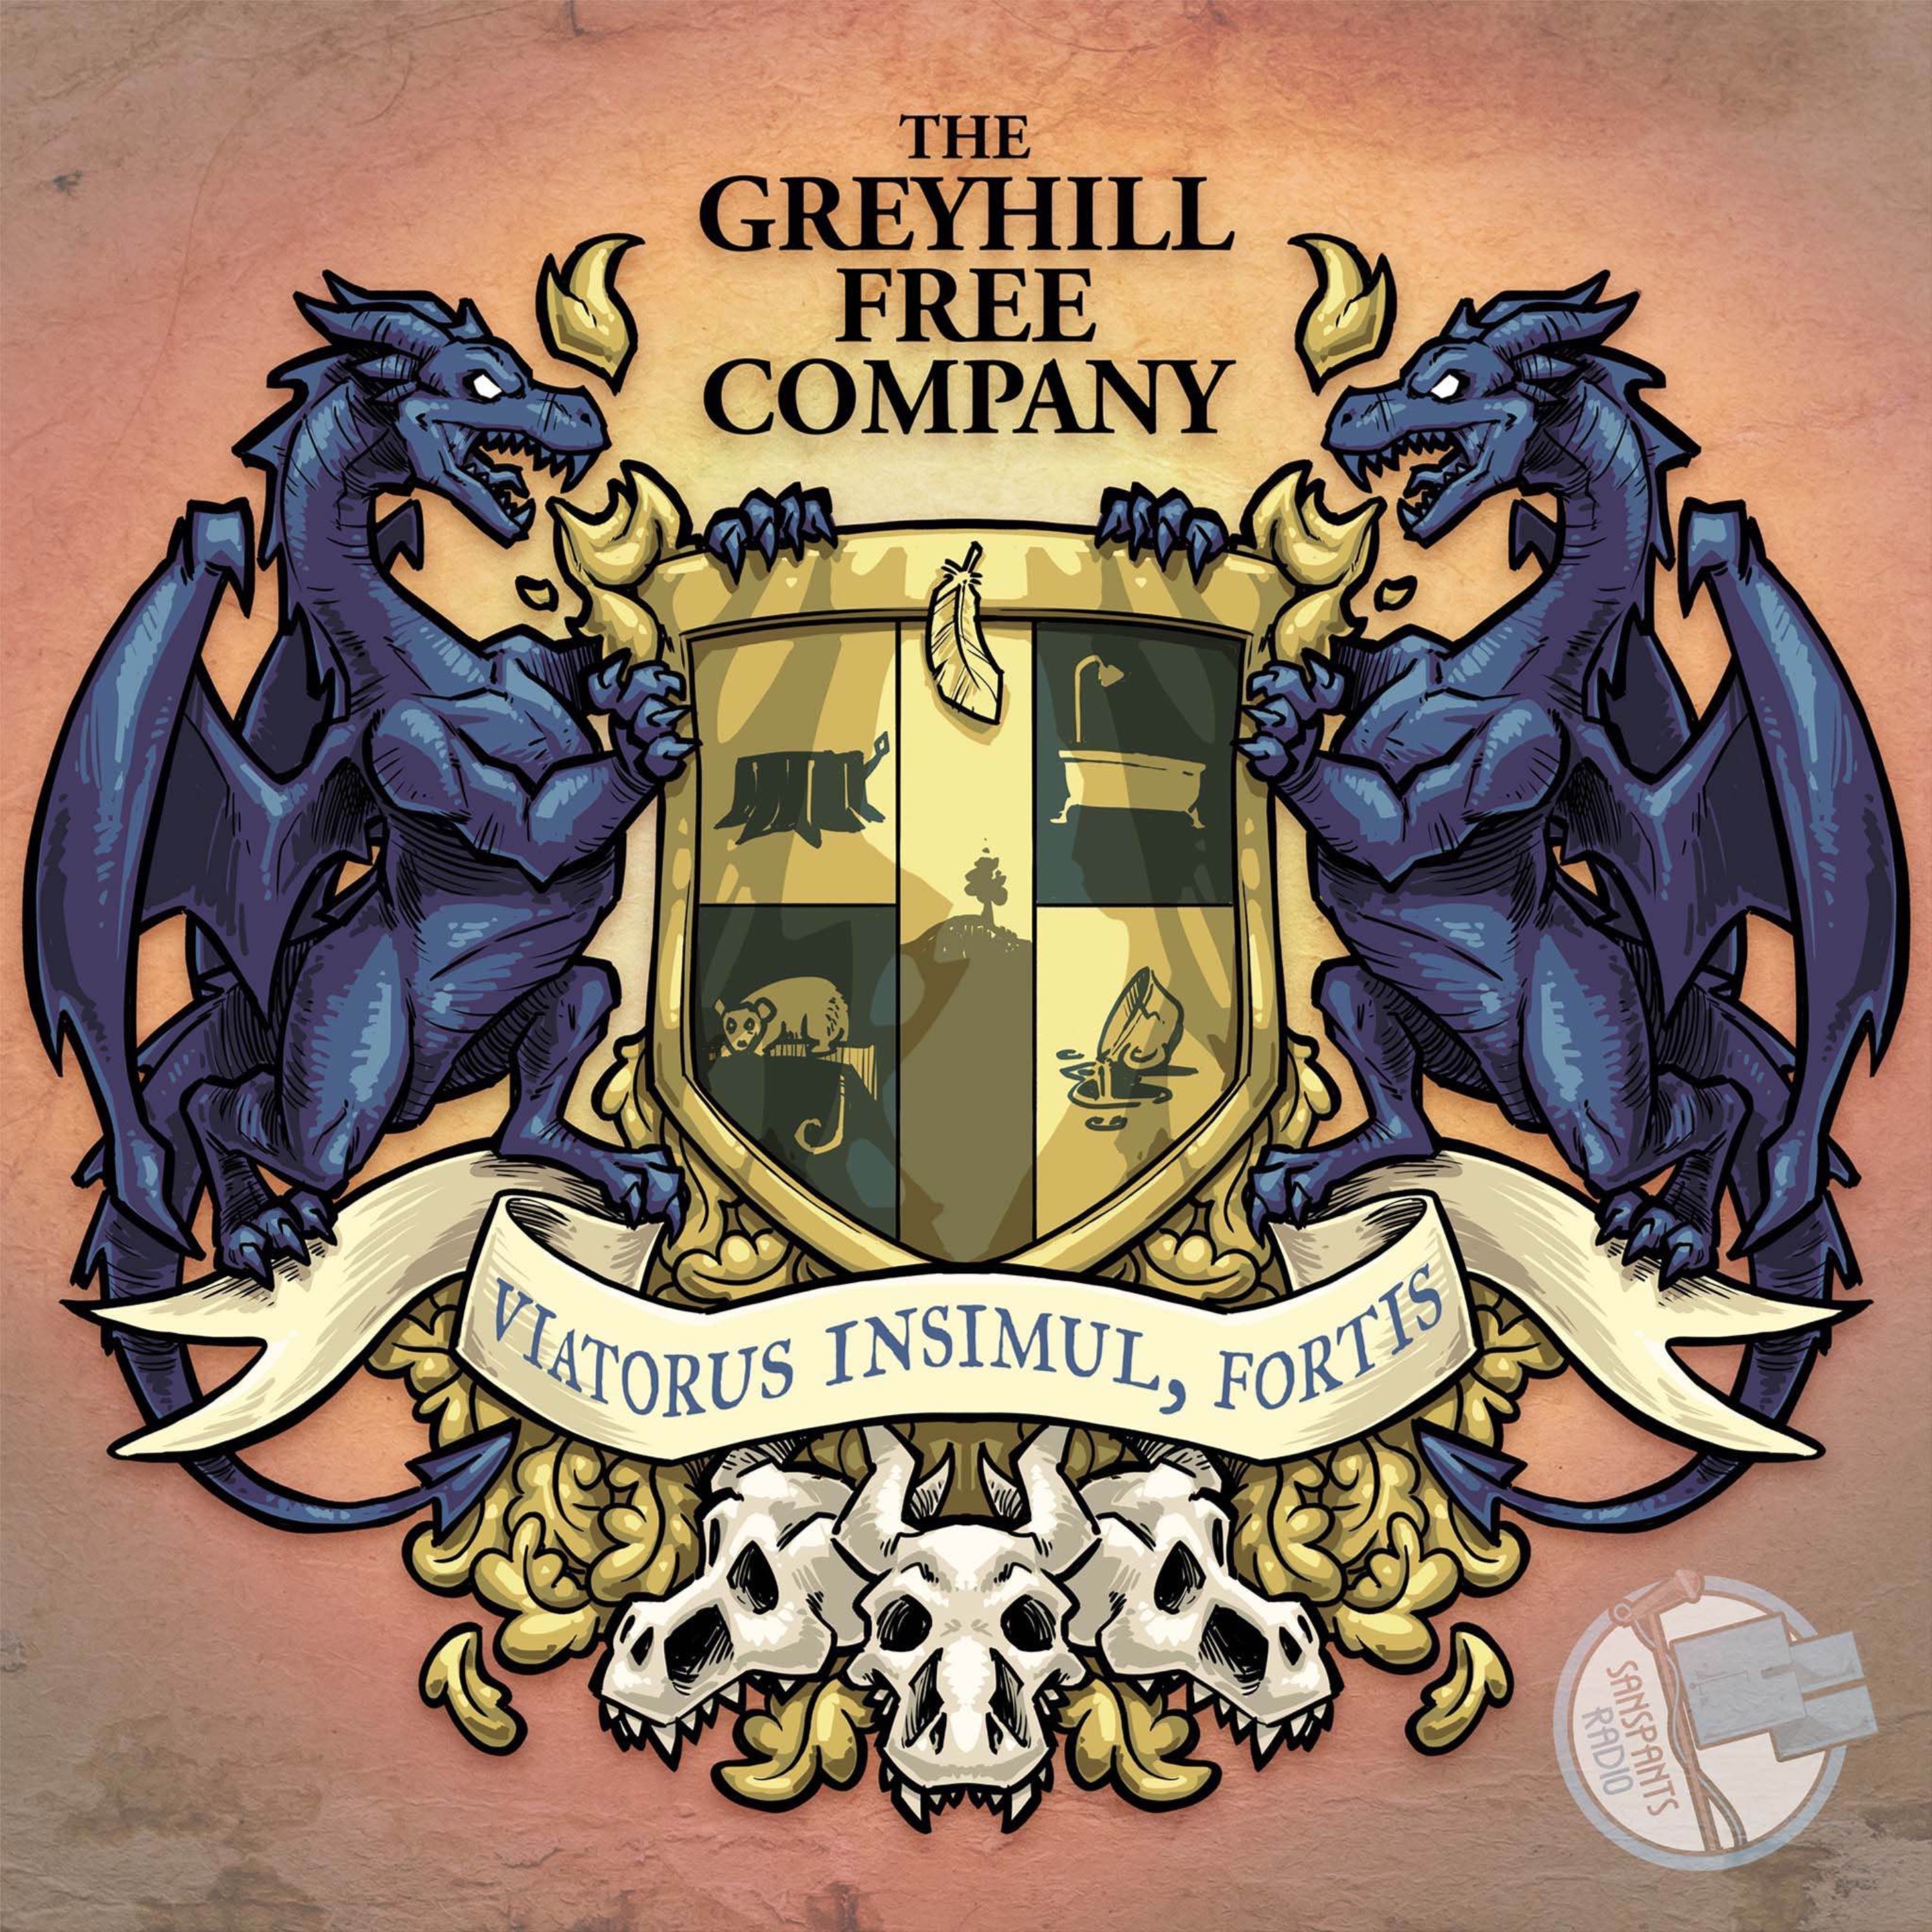 Stories of The Greyhill Free Company II #7 Memory Worms